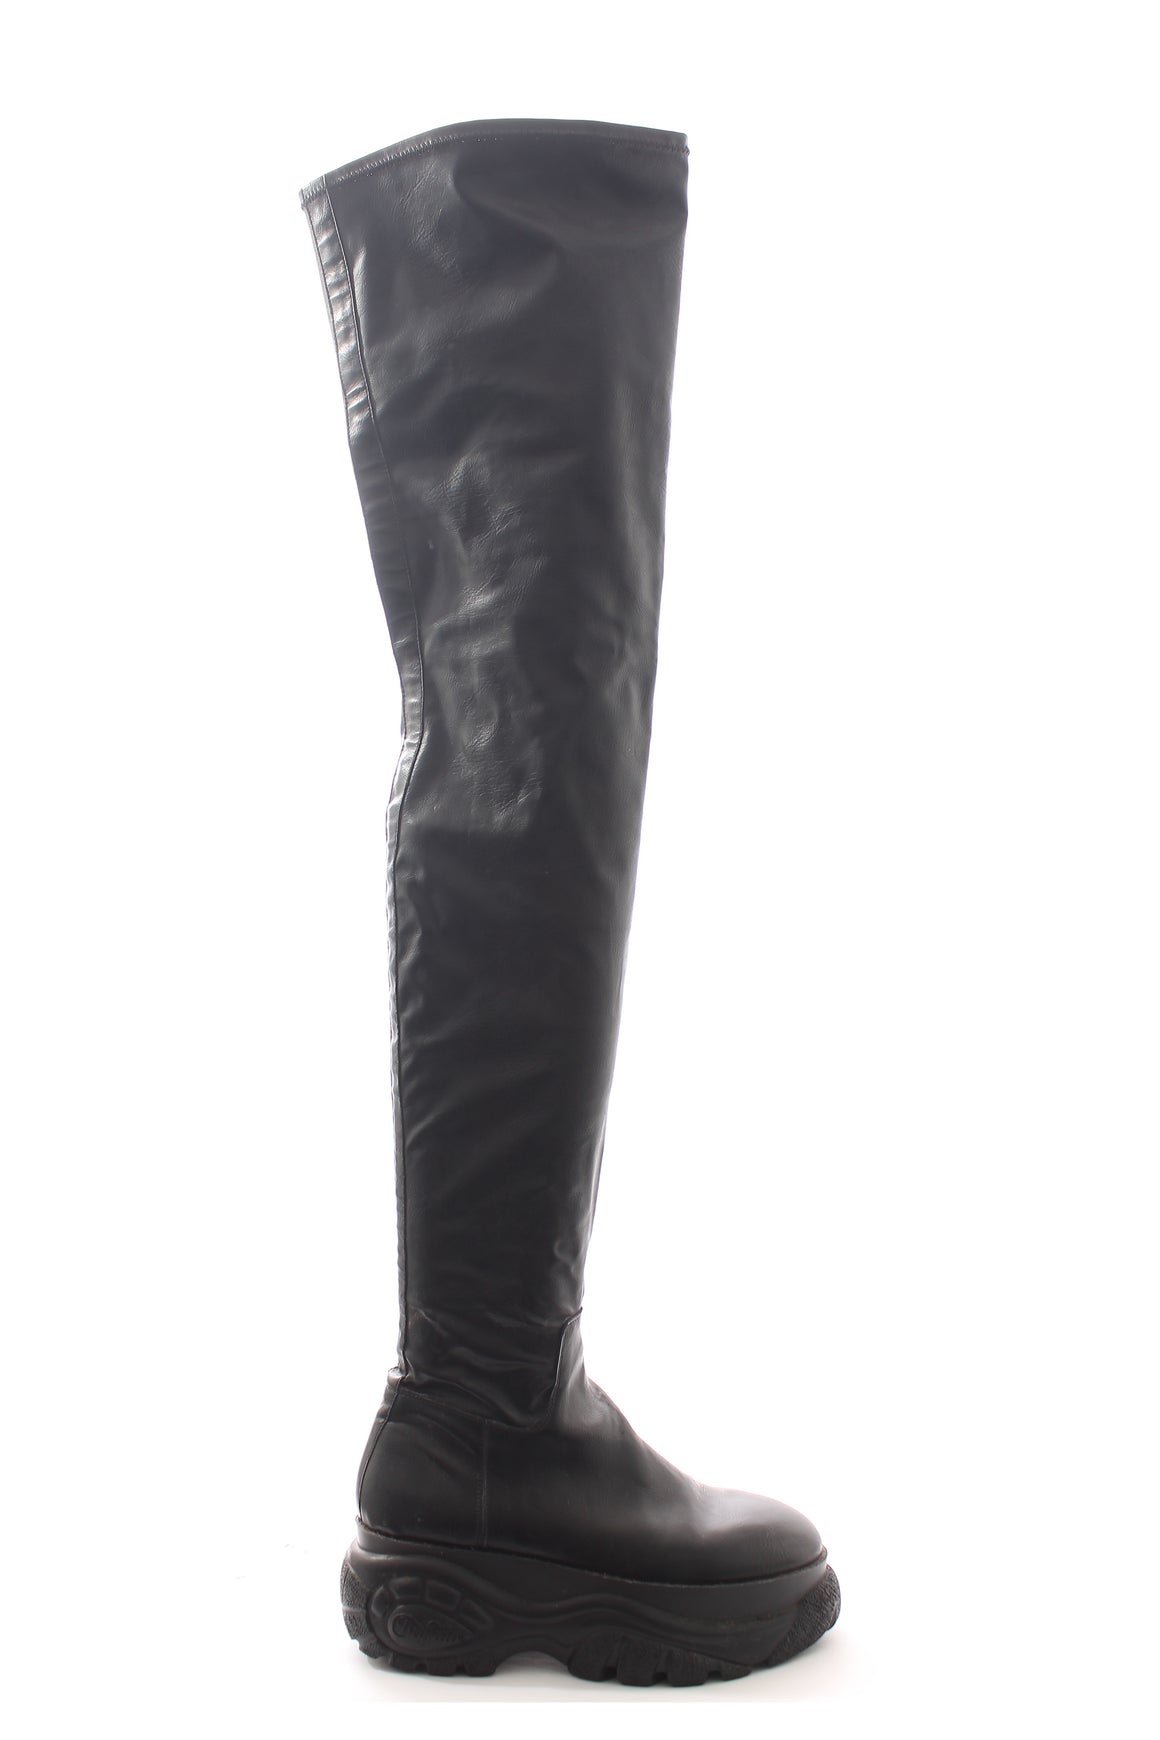 032c x Buffalo London Special Edition Over-the-knee Leather Boots